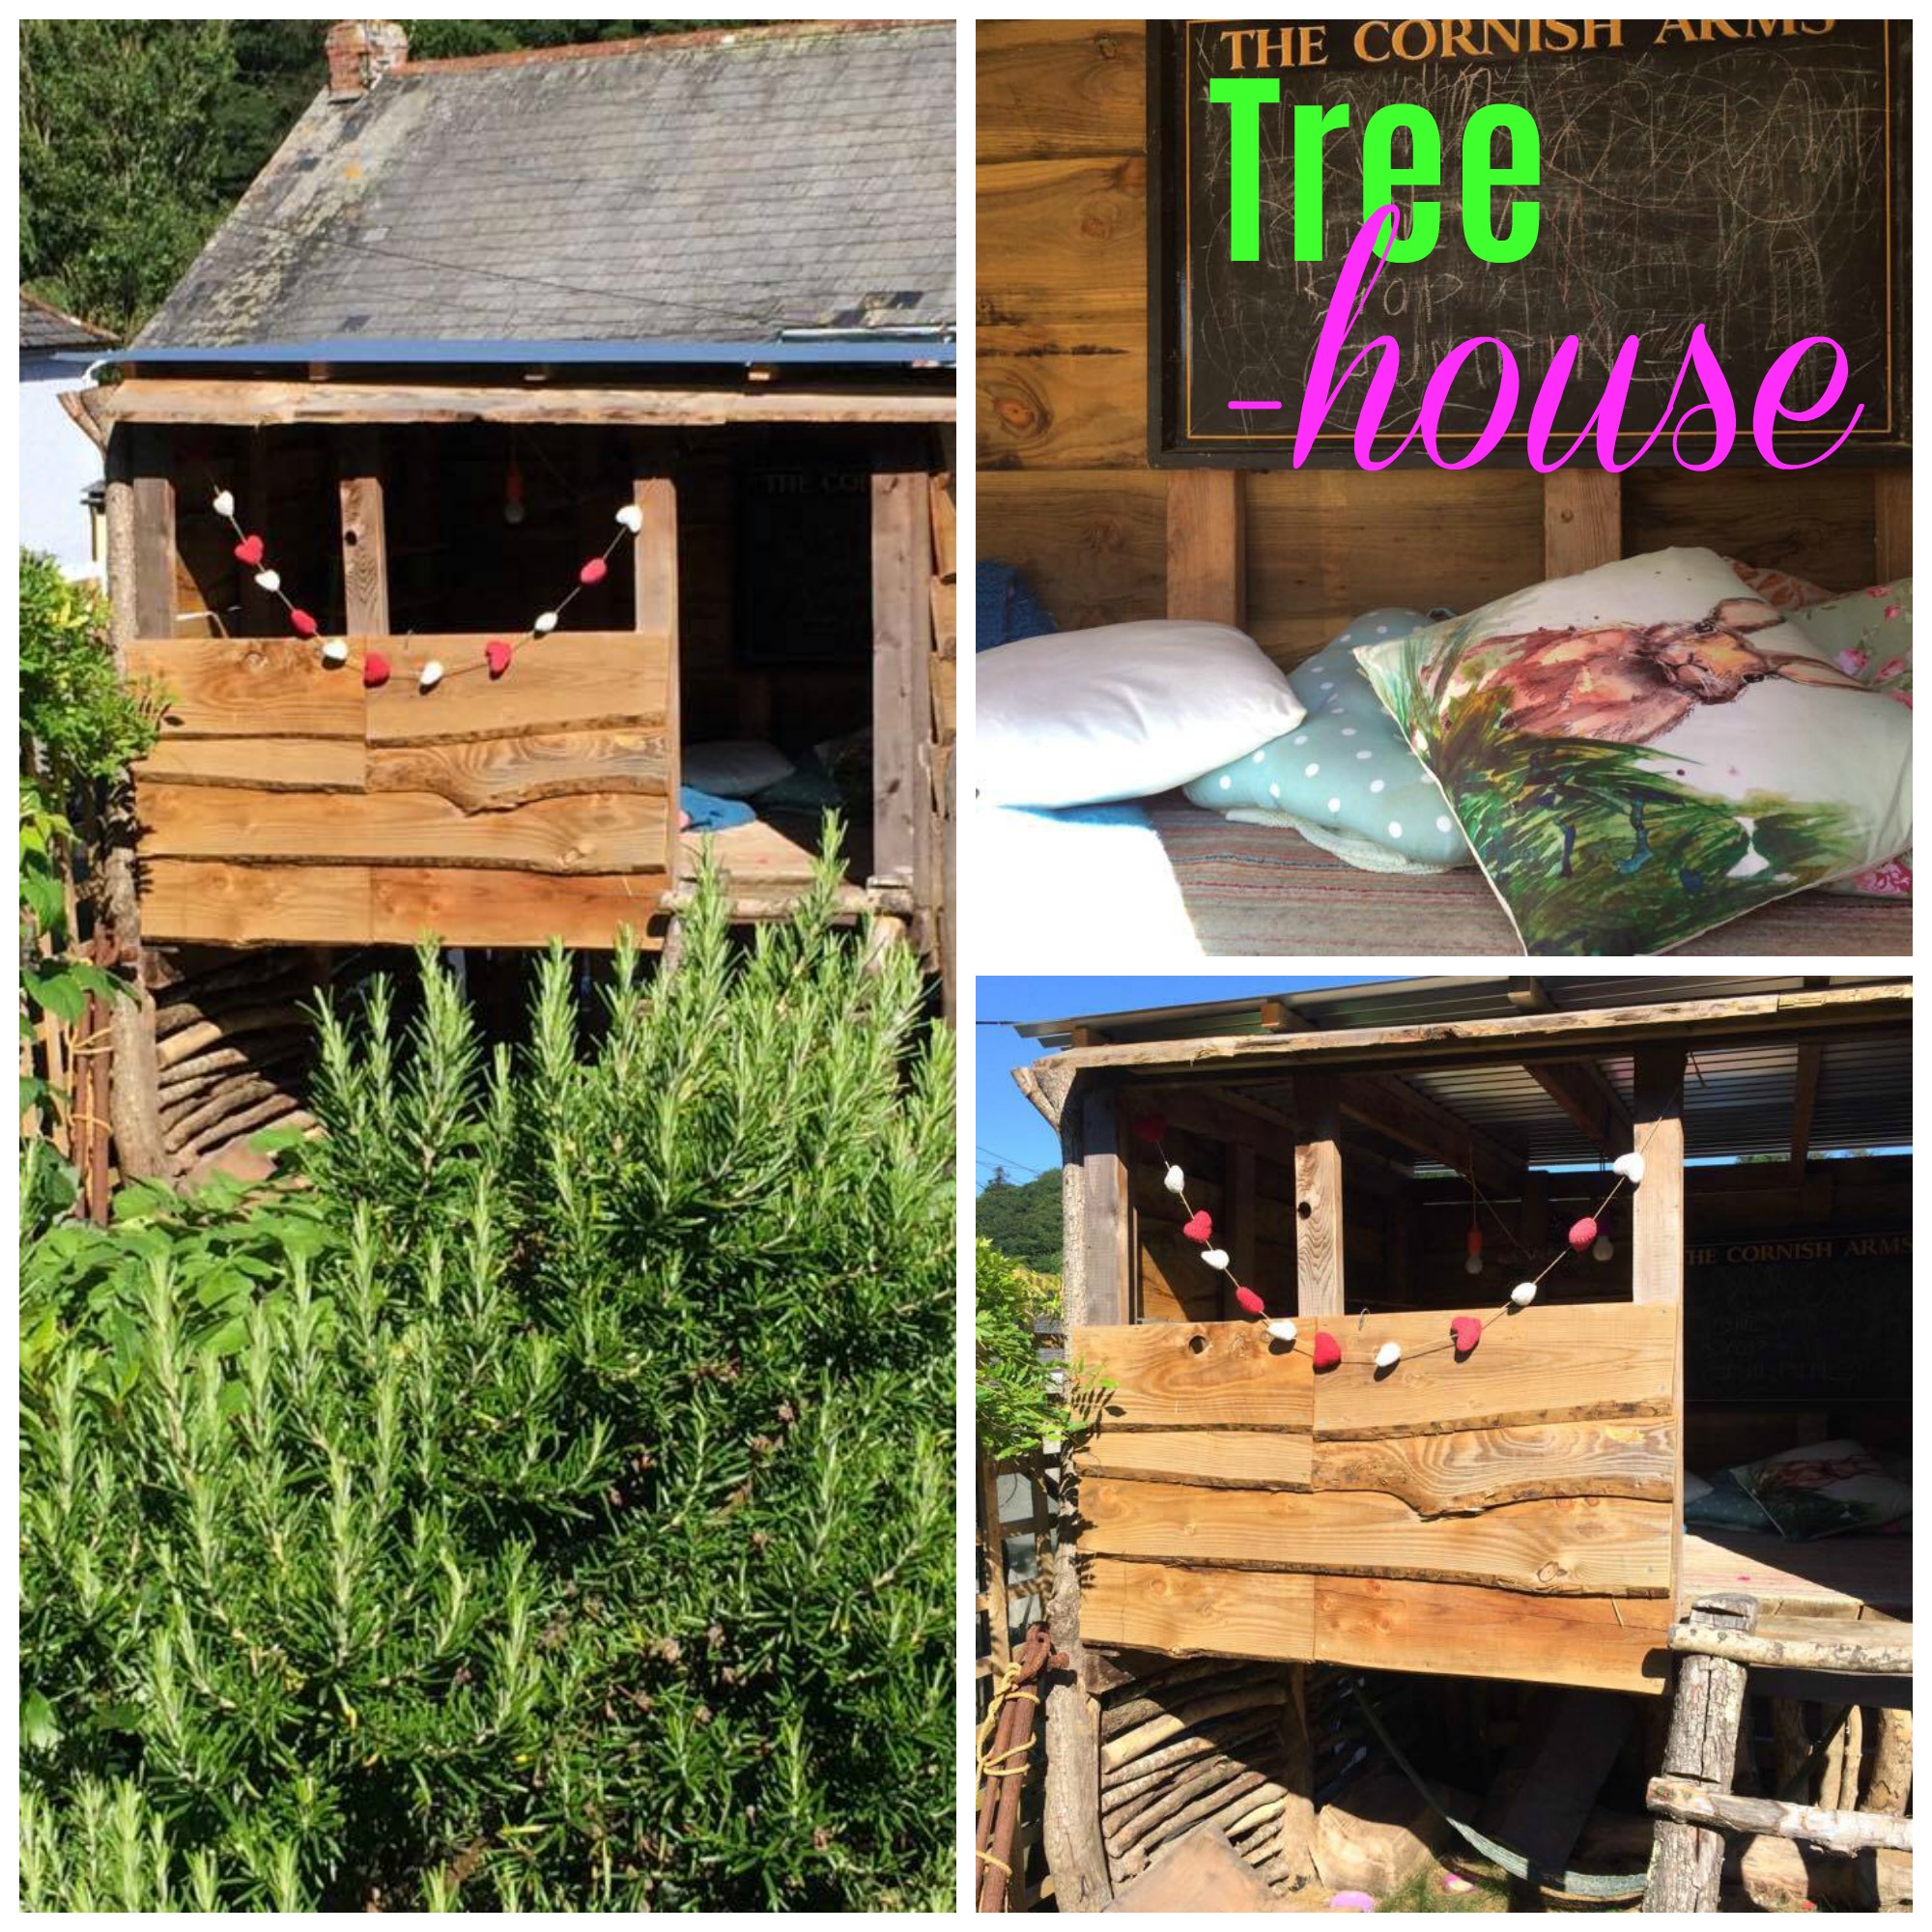 Treehouse Collage